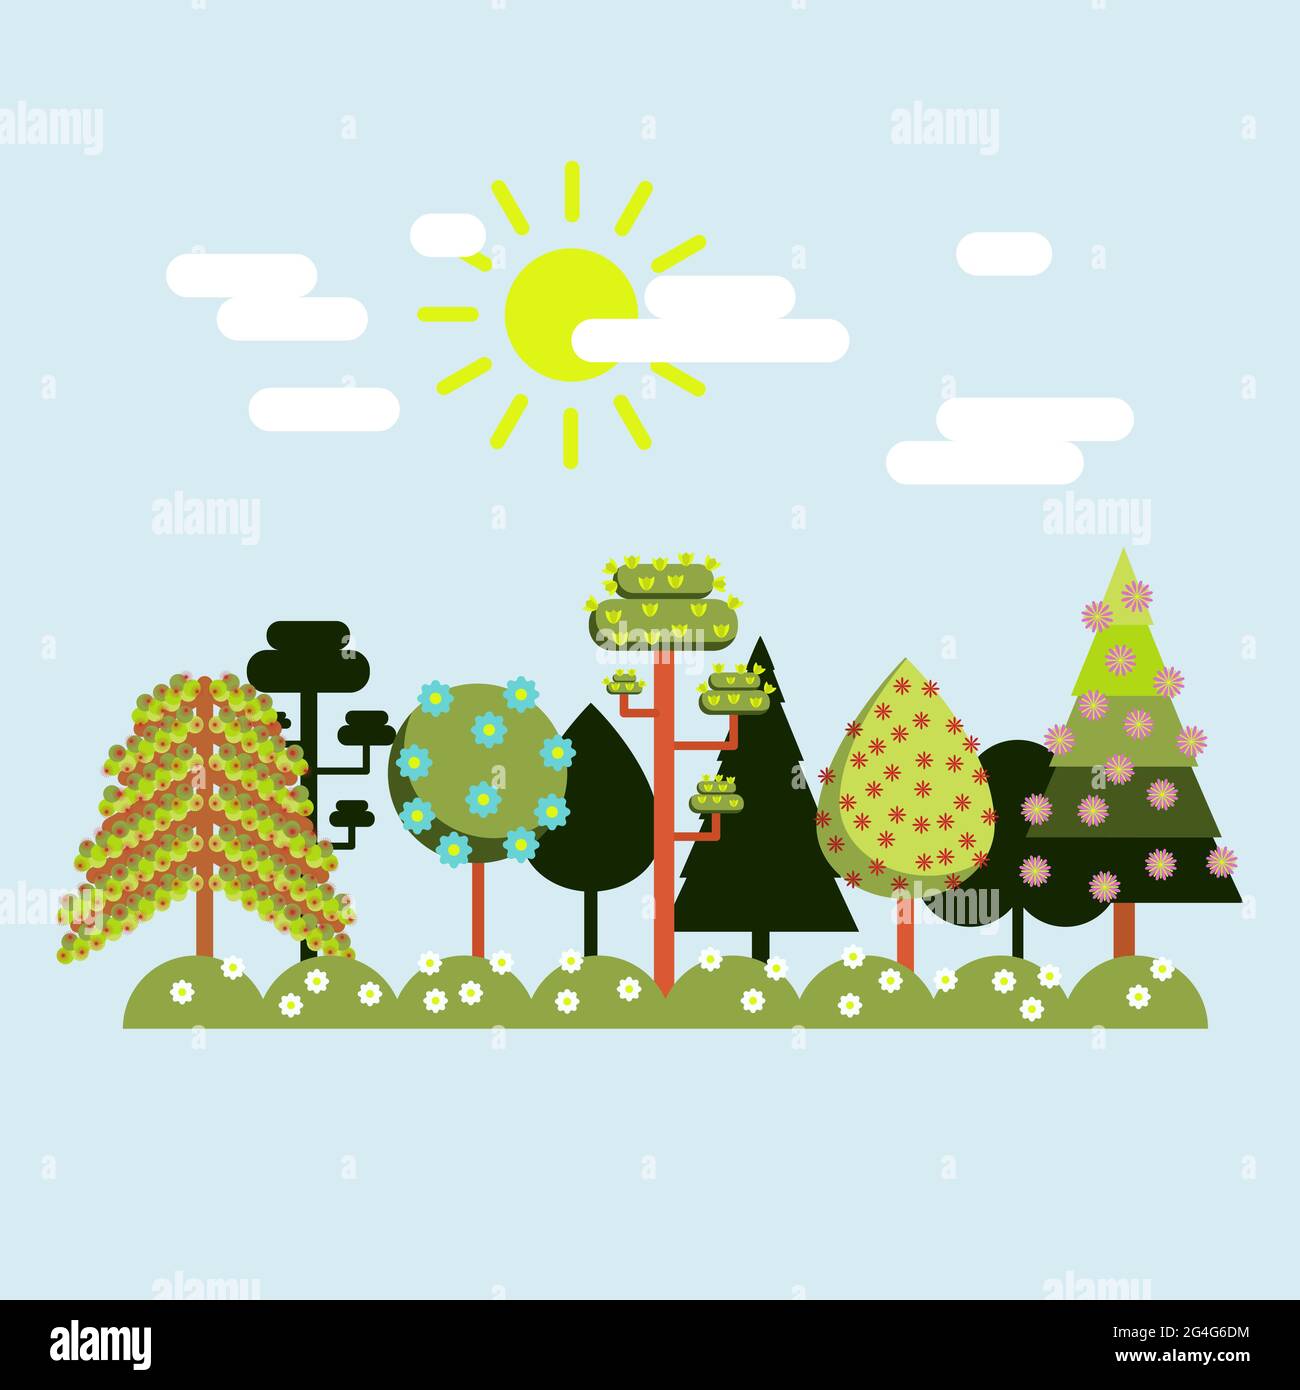 Spring landscape with trees and pines. Flowering trees. Flat design. Stock Vector